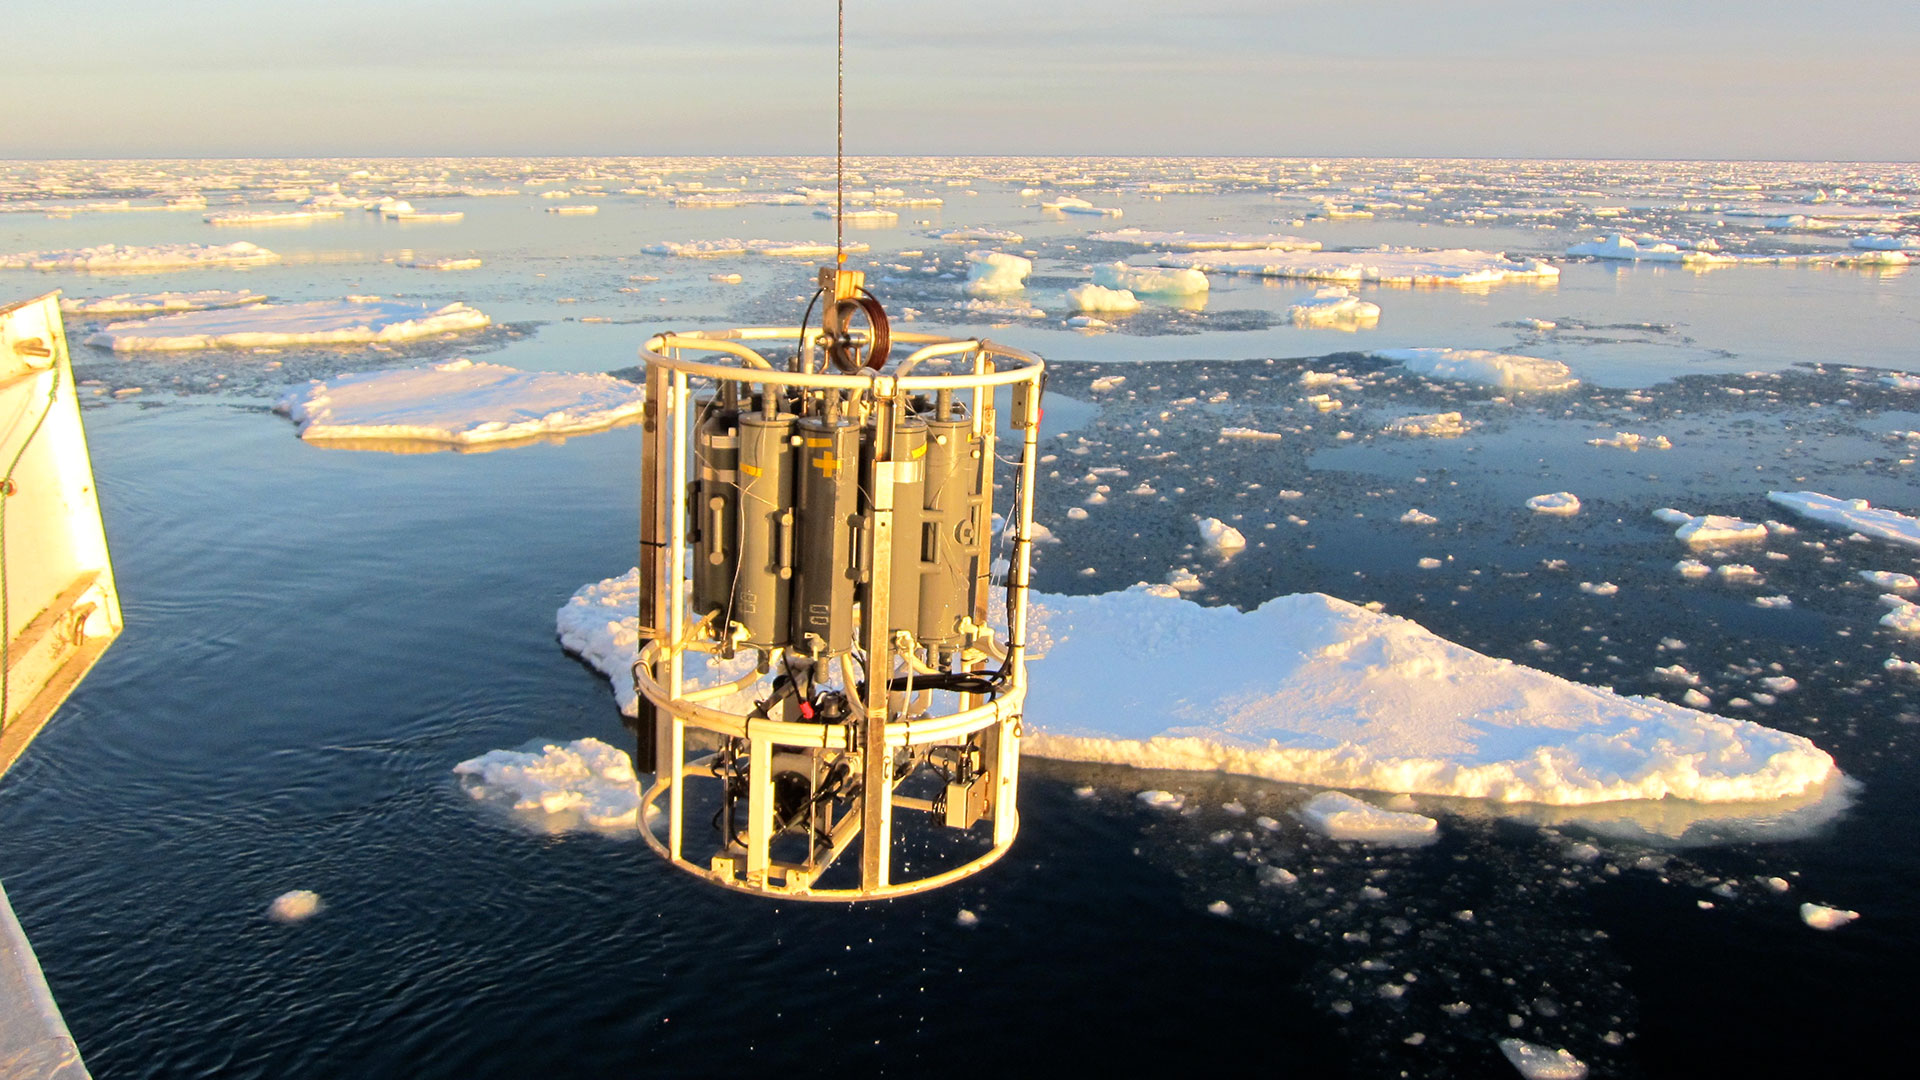 CTD is deployed from the research vessel Dana in Arctic waters